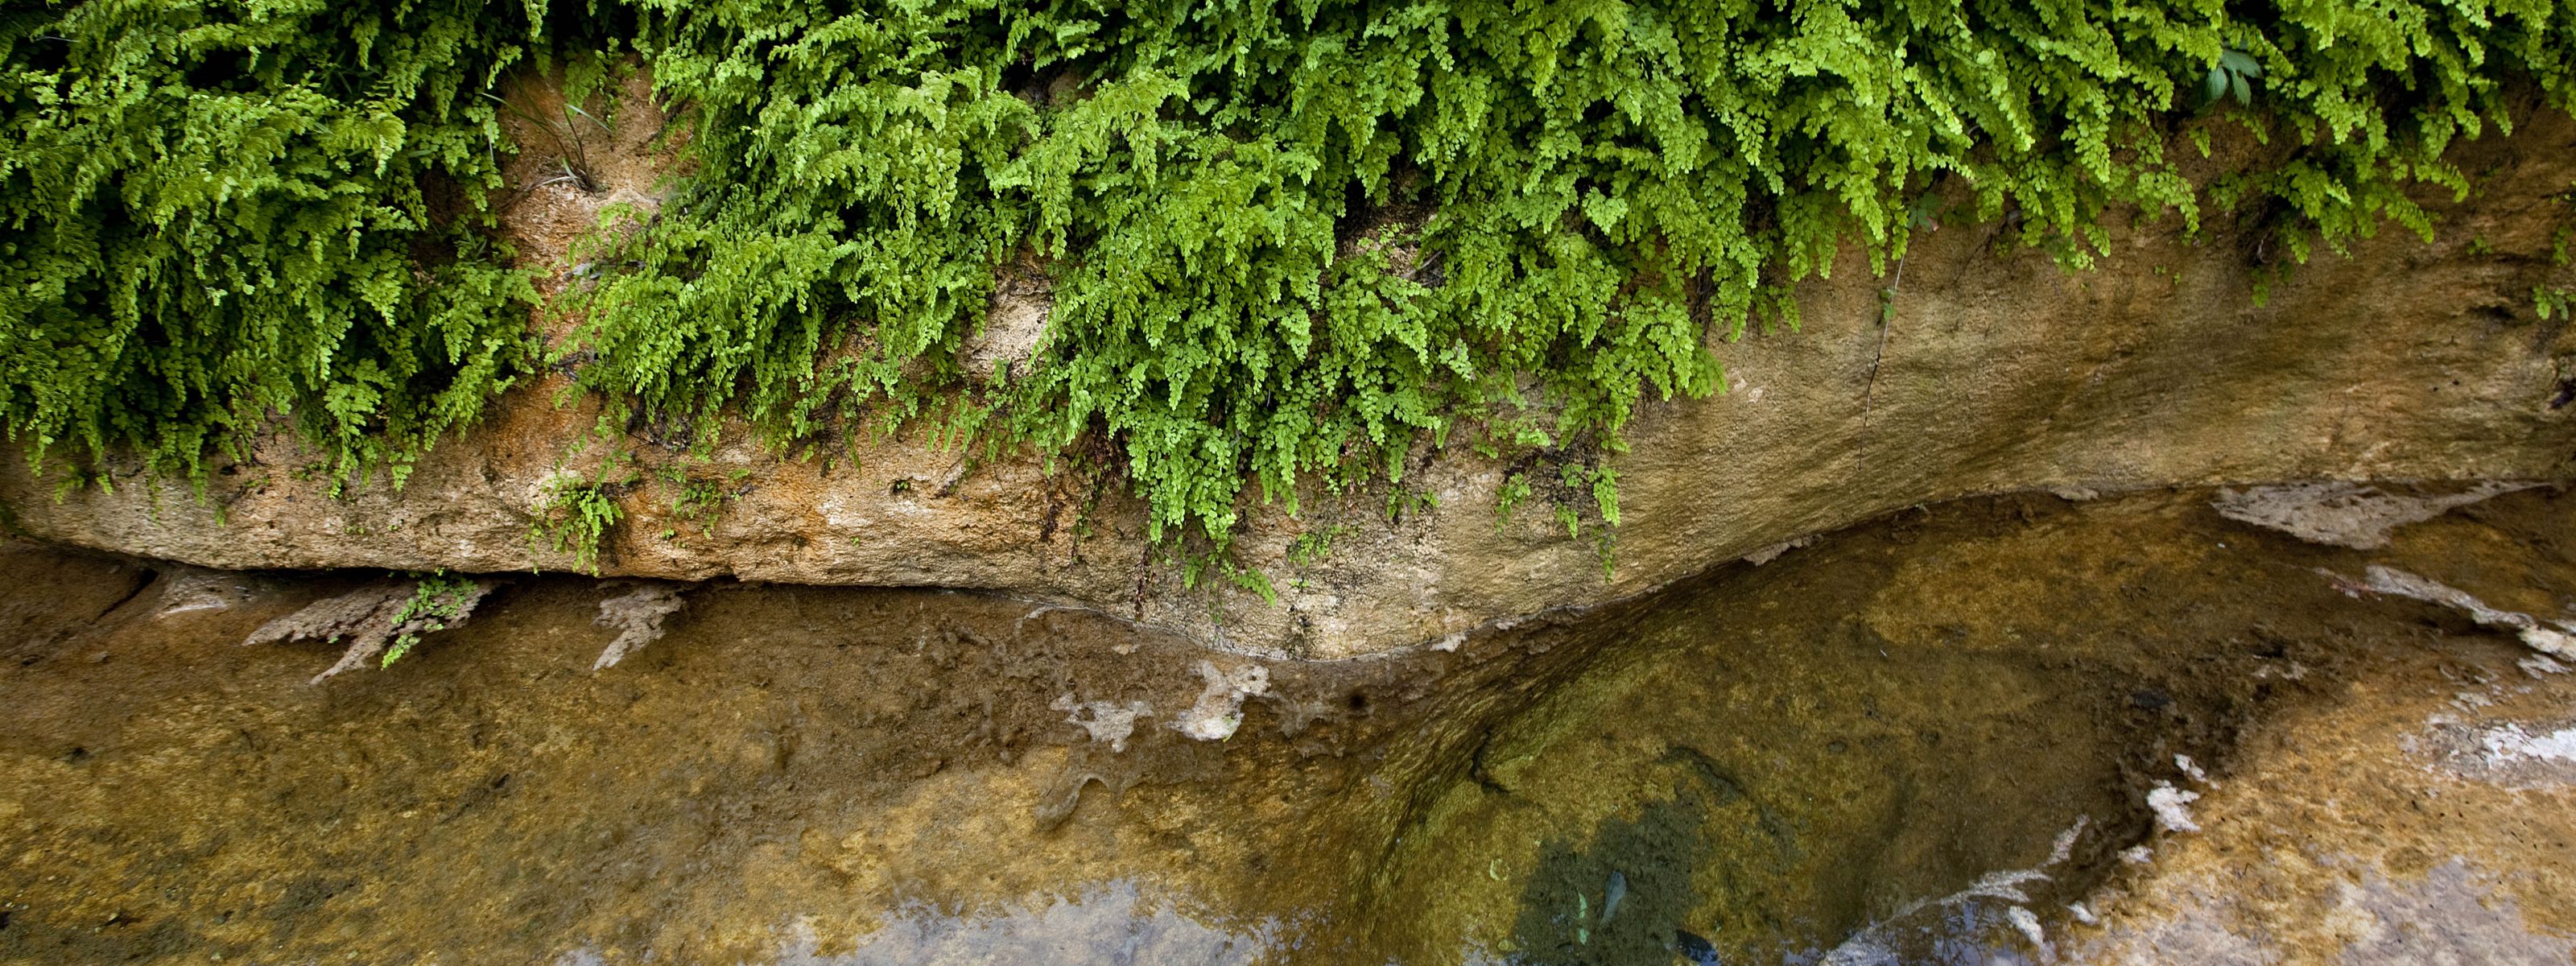 Water flows over porous rocks lined with green ferns.